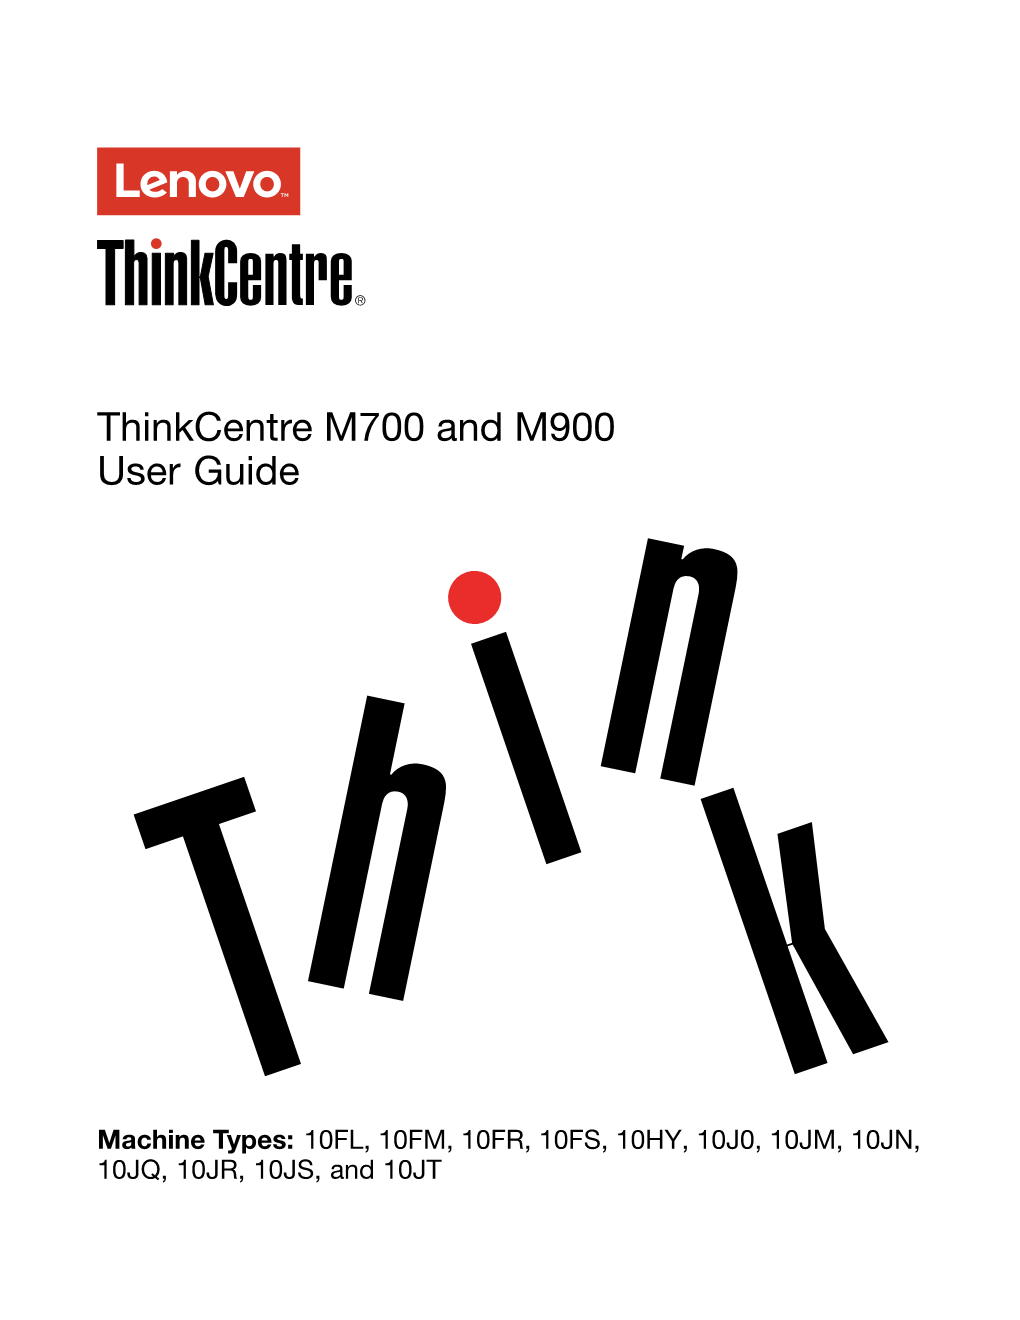 Thinkcentre M700 and M900 User Guide